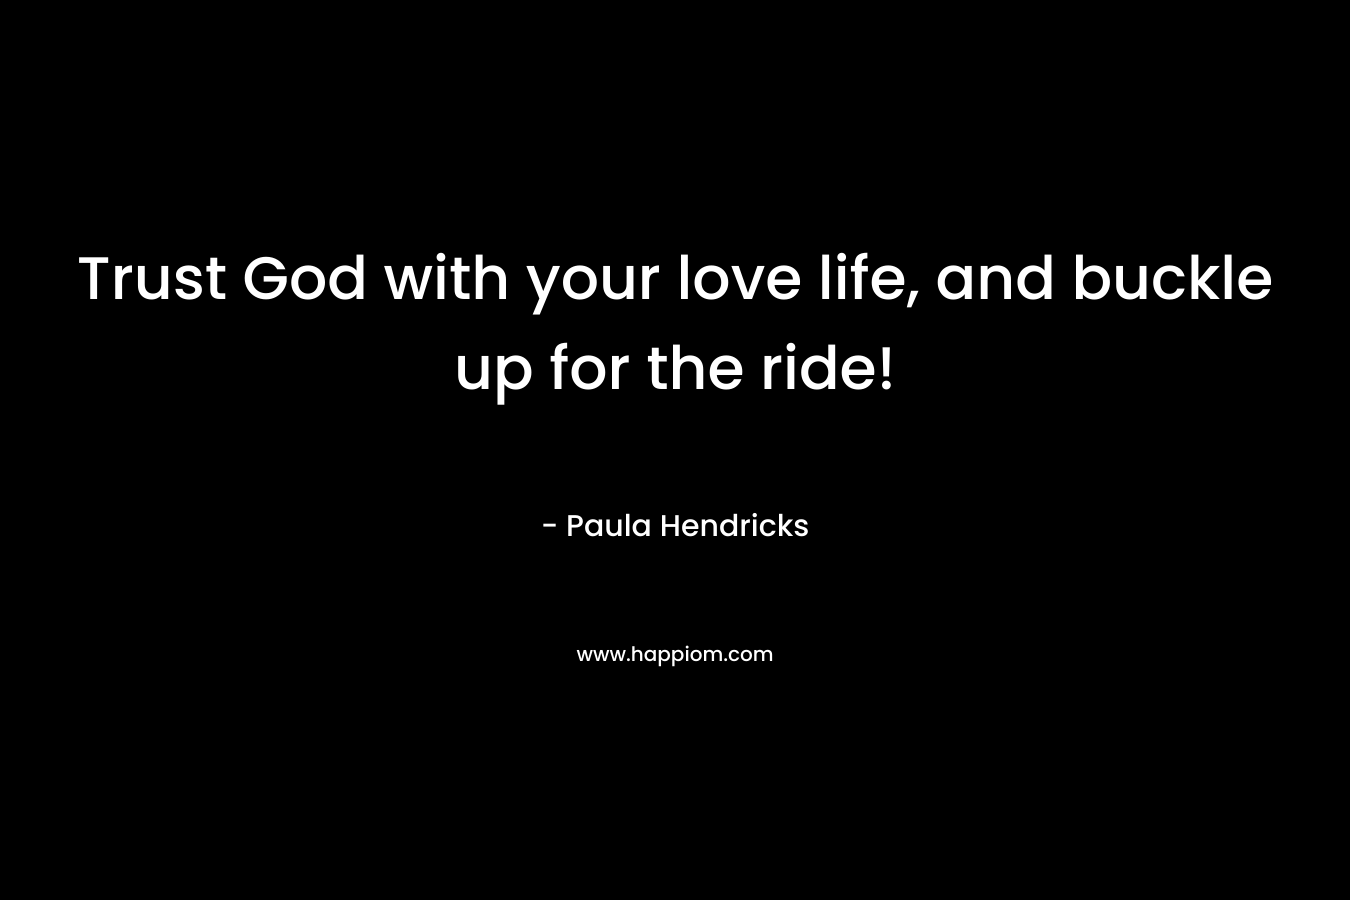 Trust God with your love life, and buckle up for the ride!